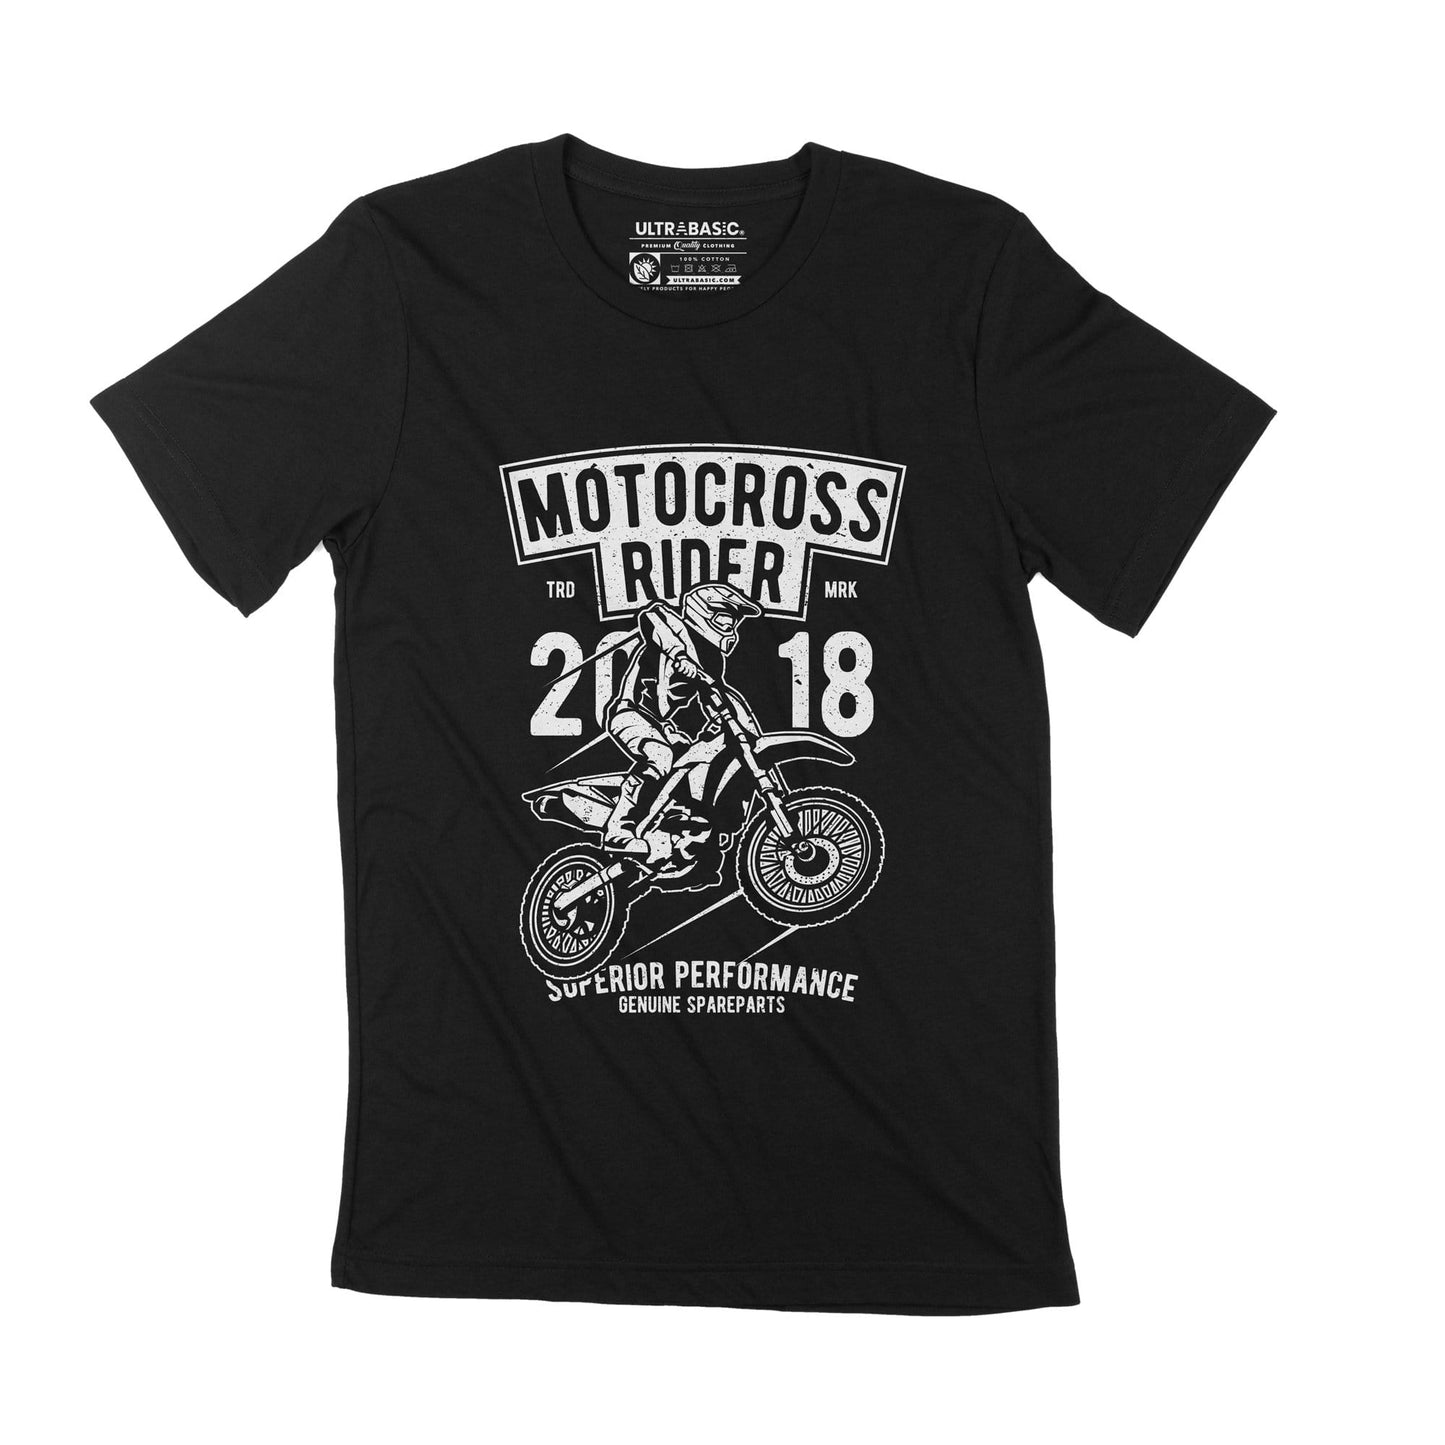 ULTRABASIC Motocross Rider 2018 - Mountain Bicycle Graphic Tee - Extreme Cycling dirt bmx superior performance genuine spareparts clothing merch present fathers day tshirts dad apparel mercandise letter clothing womens christmas novelty unisex classic guys adult casual teens boys outfit street print youth outdoor nature love 